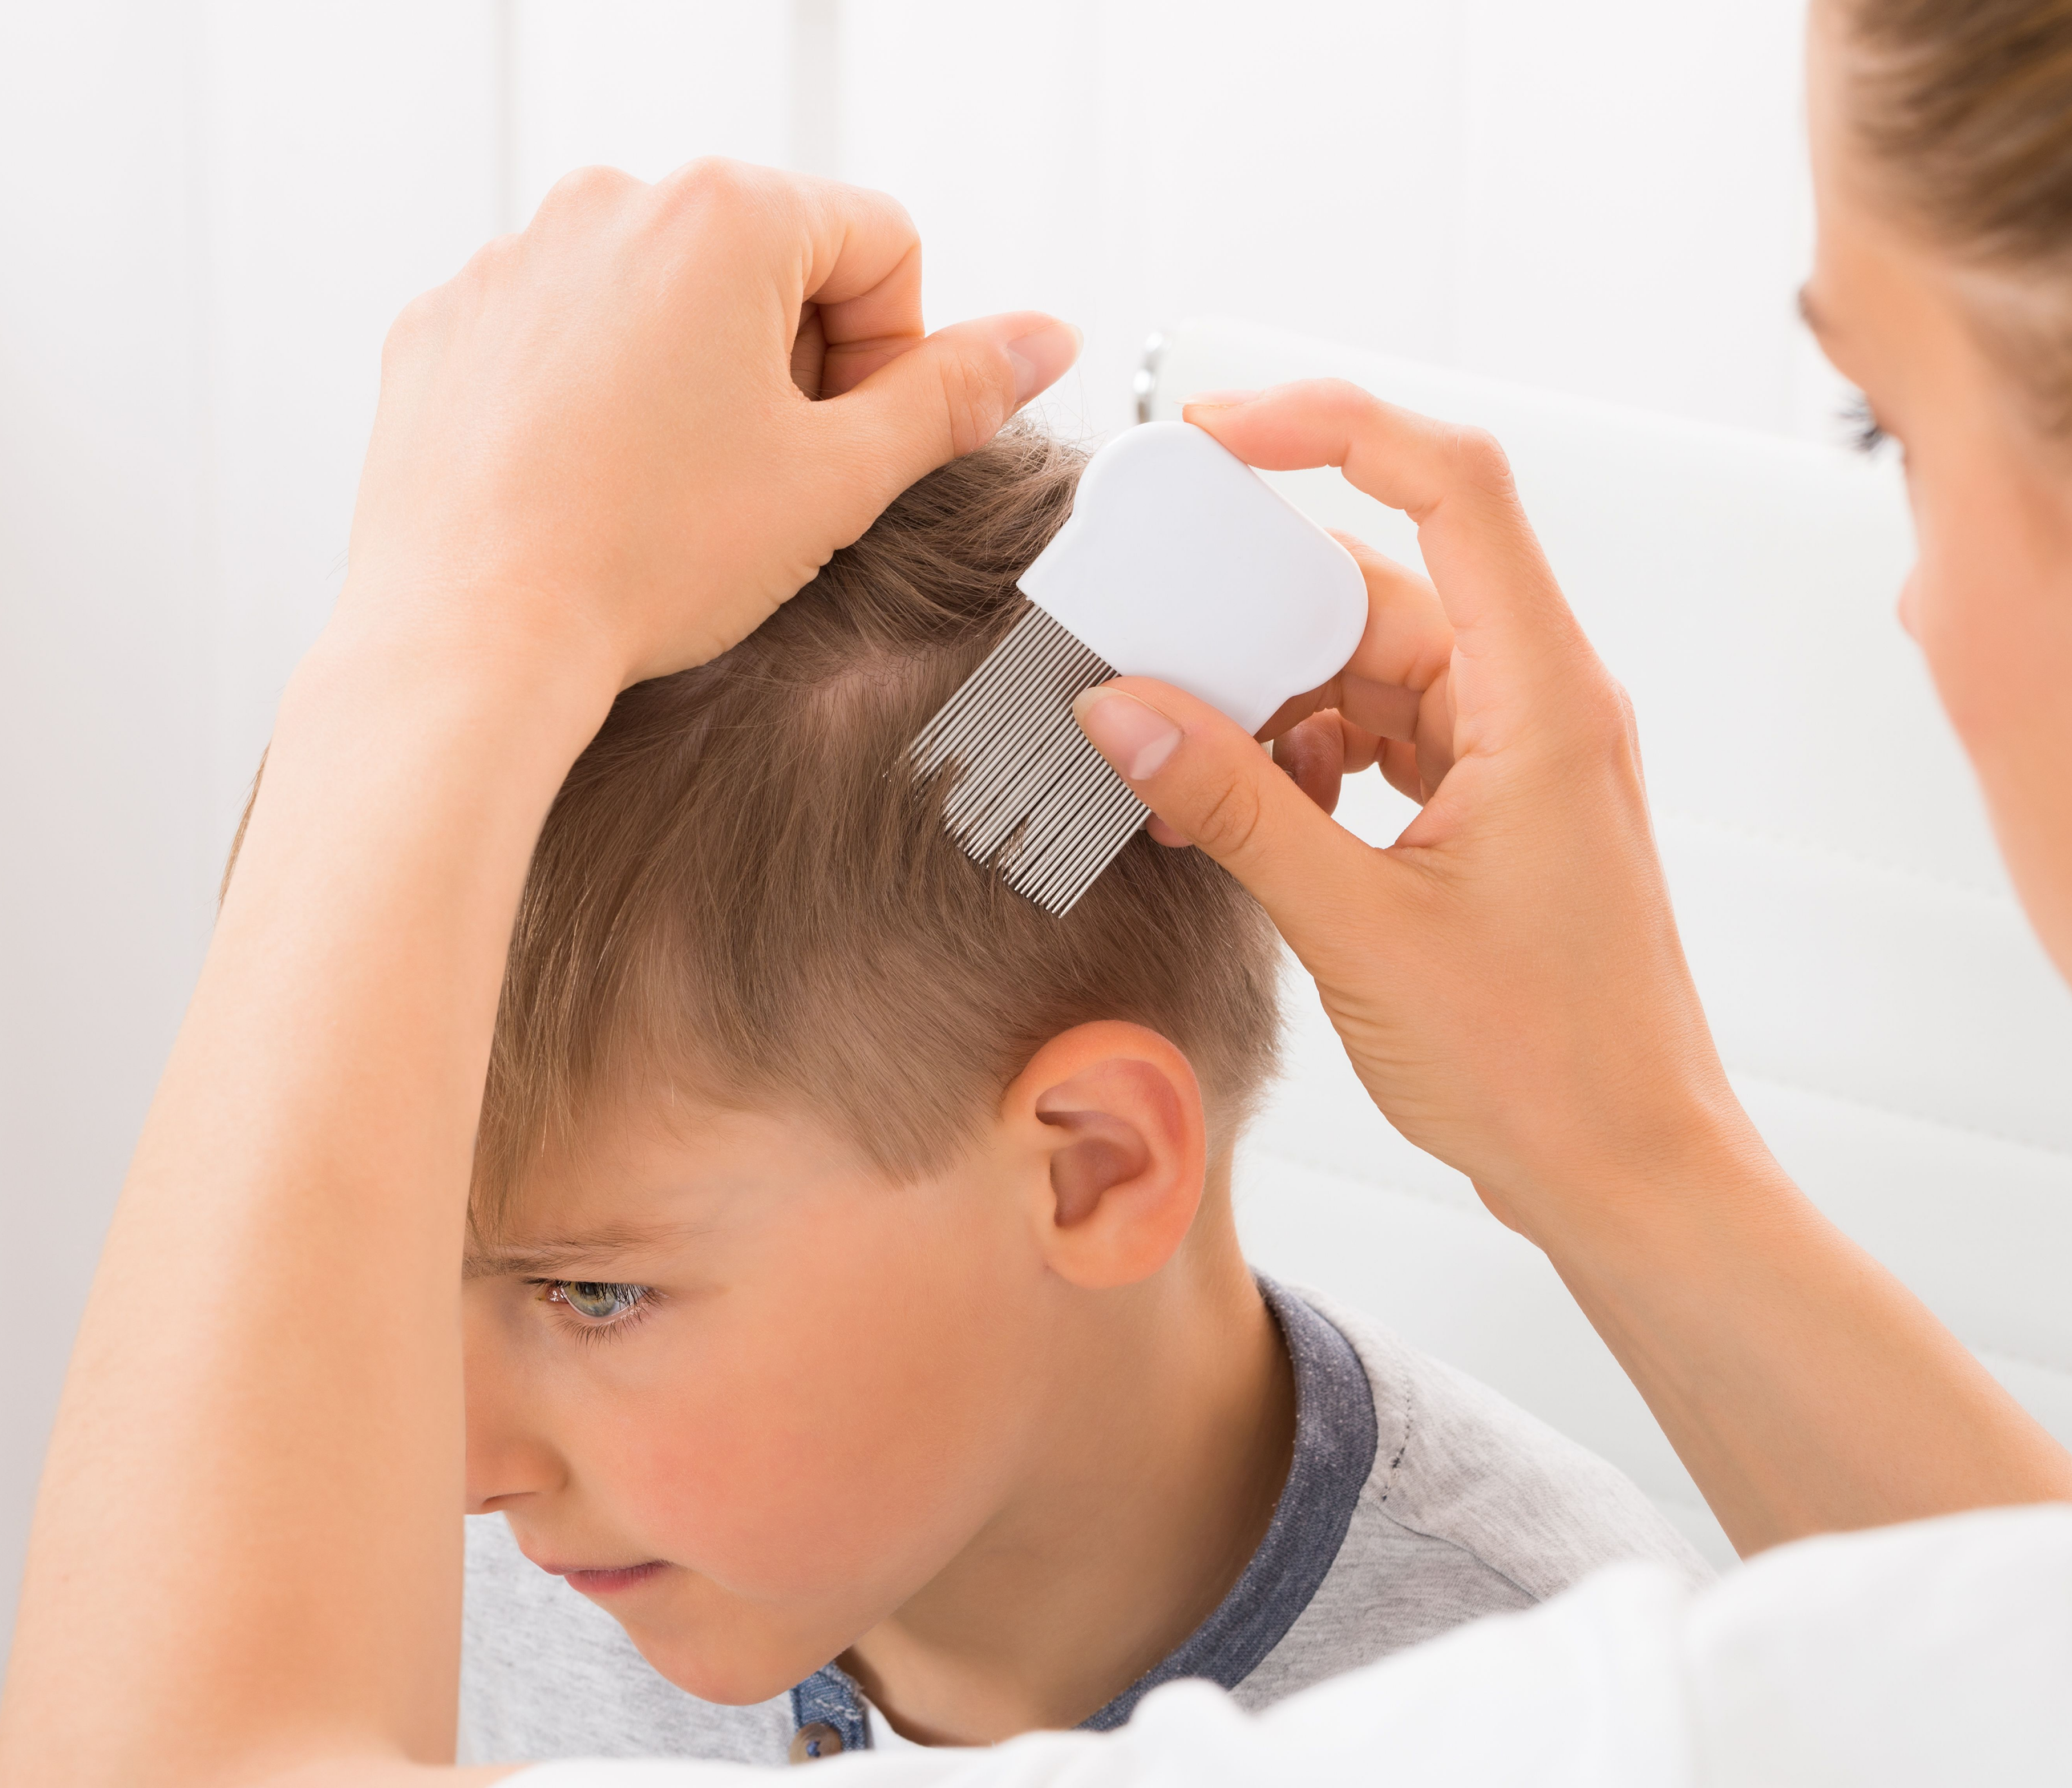 Removing lice from a boy's head